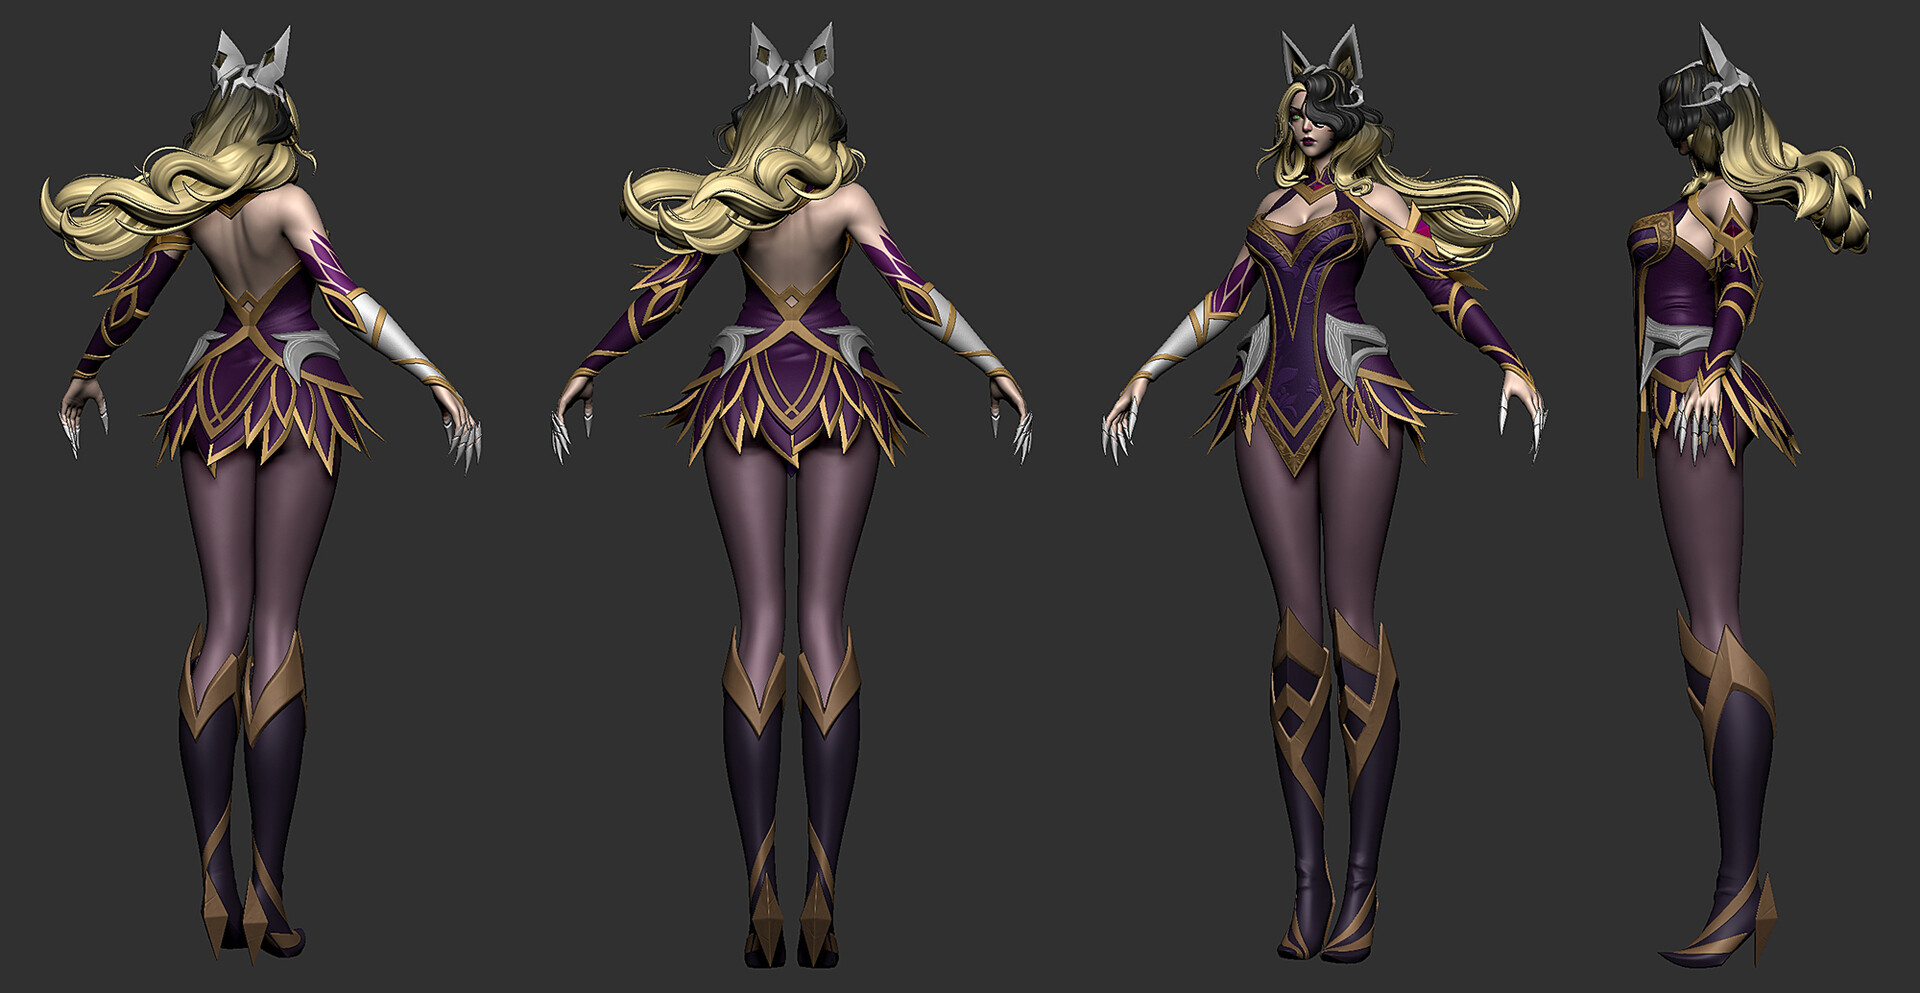 Coven Ahri Skin Concept 𝙖𝙧𝙩𝙞𝙨𝙩: Unstable Anomaly 𝙥𝙡𝙖𝙩𝙛𝙤𝙧𝙢:  ArtStation (from @adoerablearts on Instagram who reposts others work)